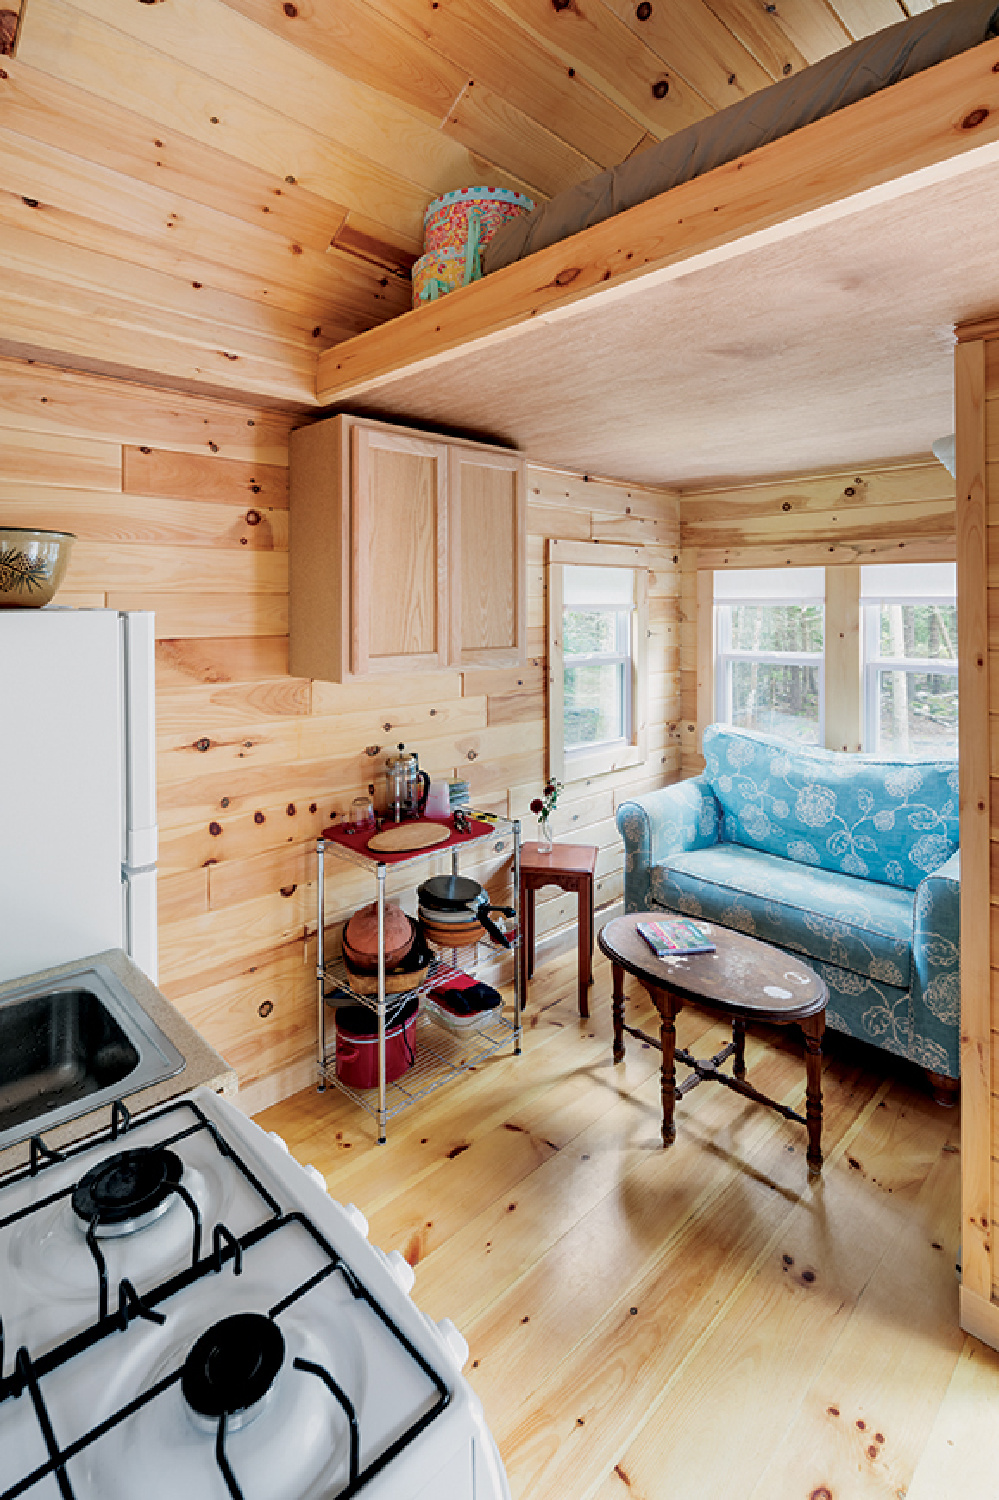 Knotty wood plank walls and ceilings in a tiny cottage kitchen and living area in Maine - @downeast. #tinyhouseinteriors #rusticpaneling